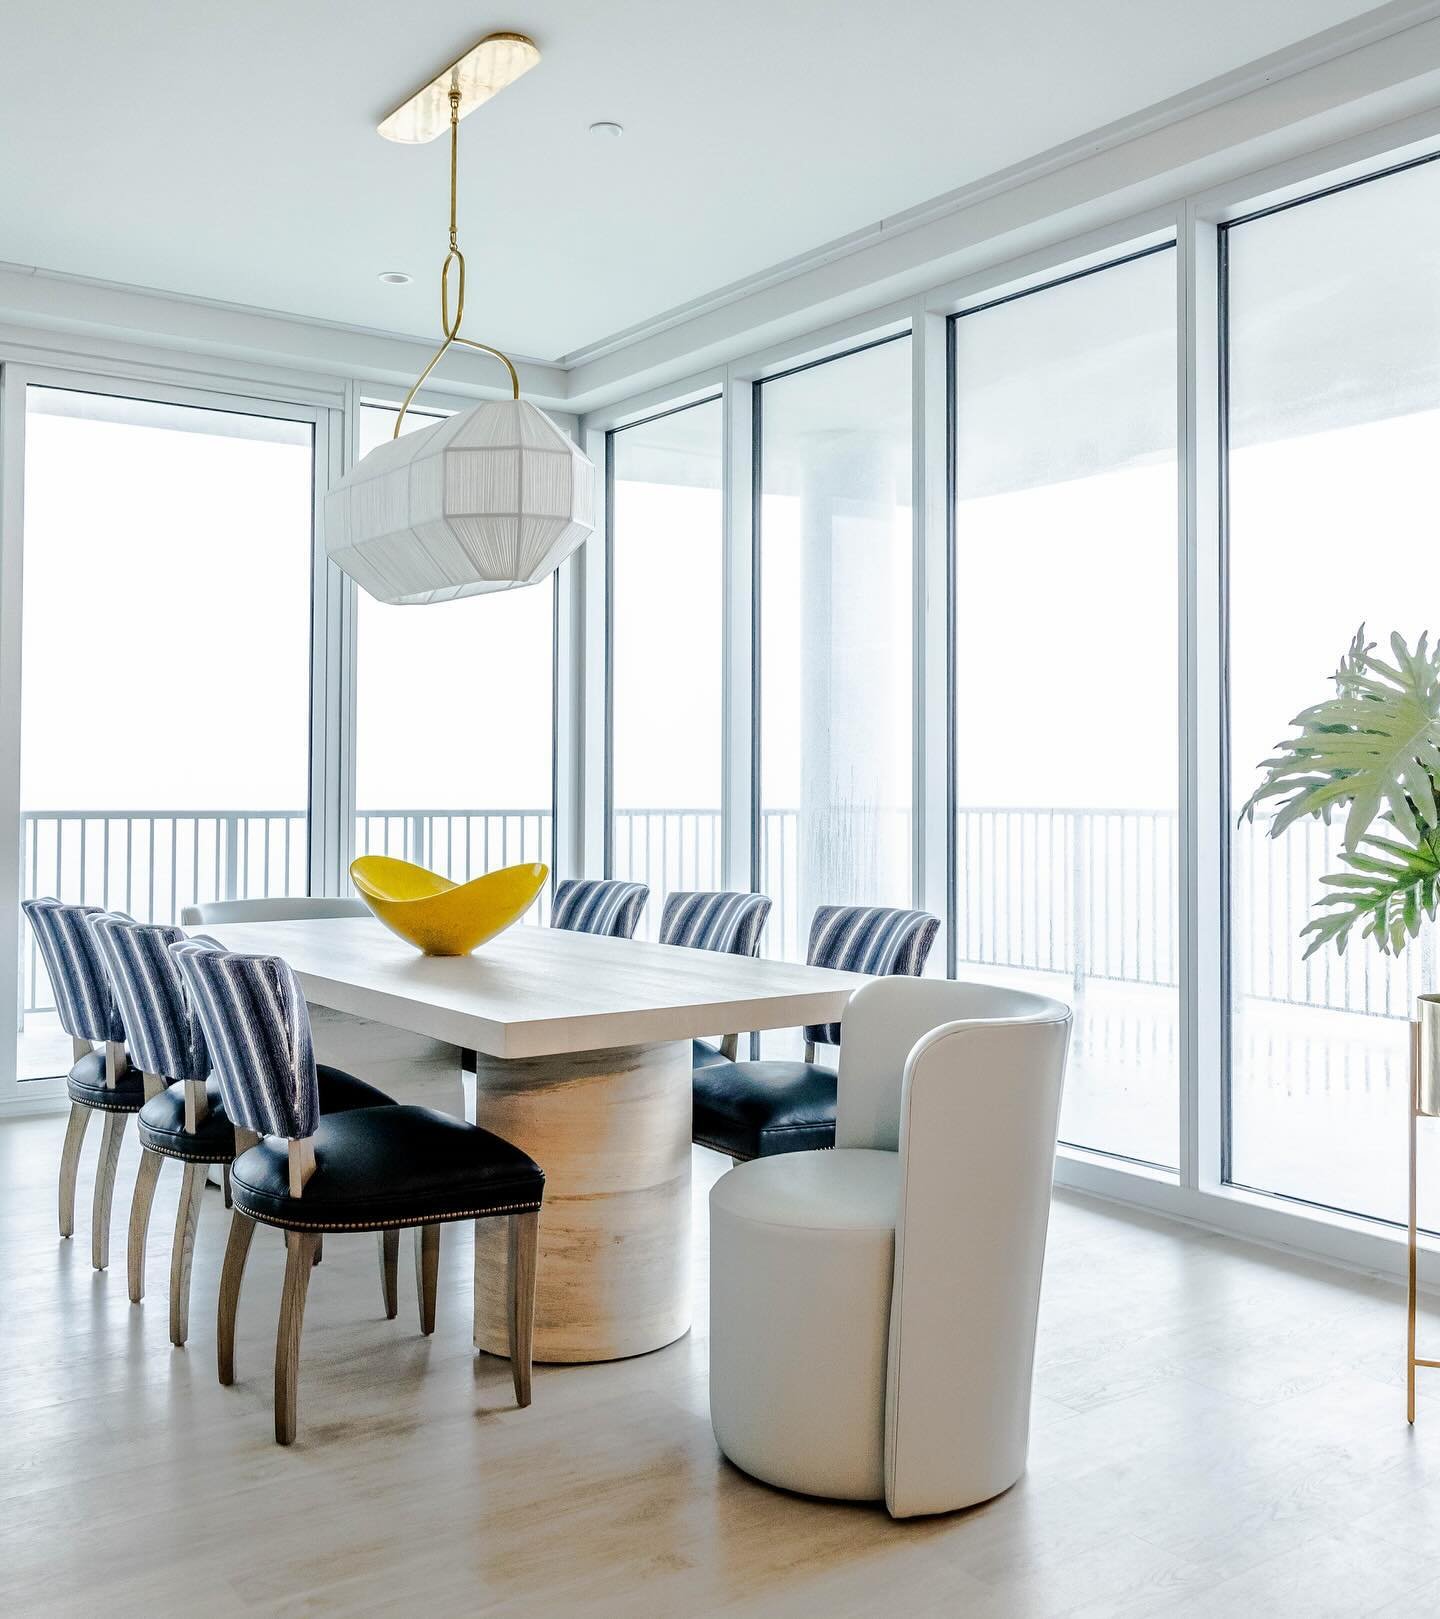 Chances are if you blink, you&rsquo;ll most likely be driving to the beach. As we approach the season of fun and sun, we reached out to interior designer, Cindy Meador, for an inside peak into one of her luxury beach condominium design projects to se